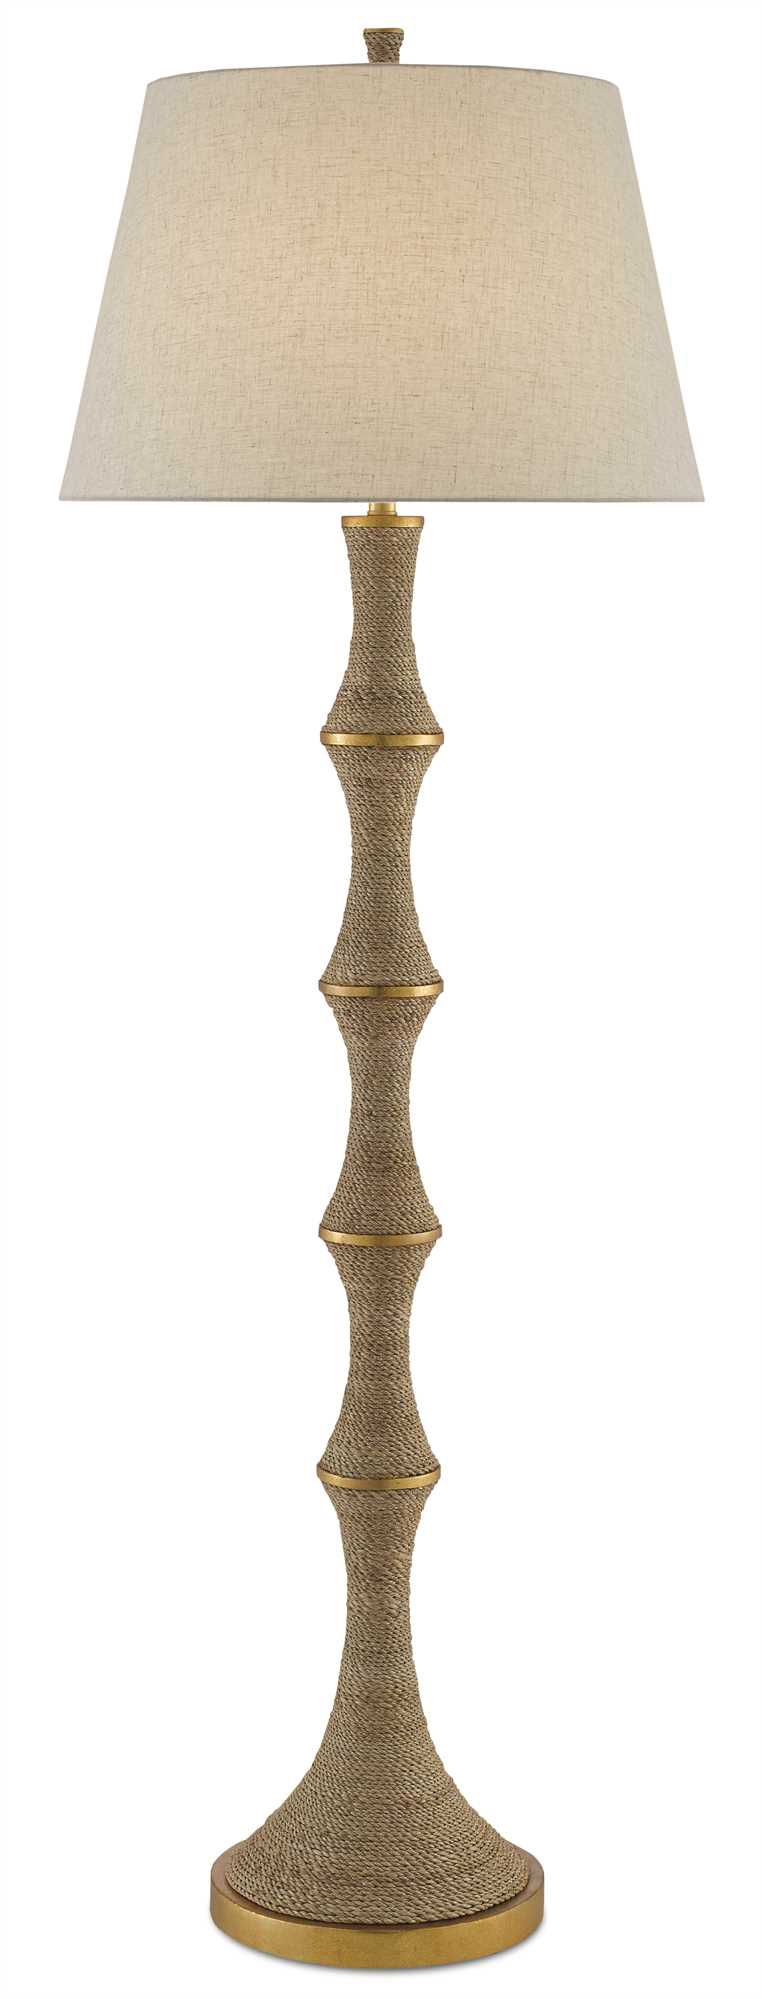 Currey and Company Bourgeon Floor Lamp 8000-0039